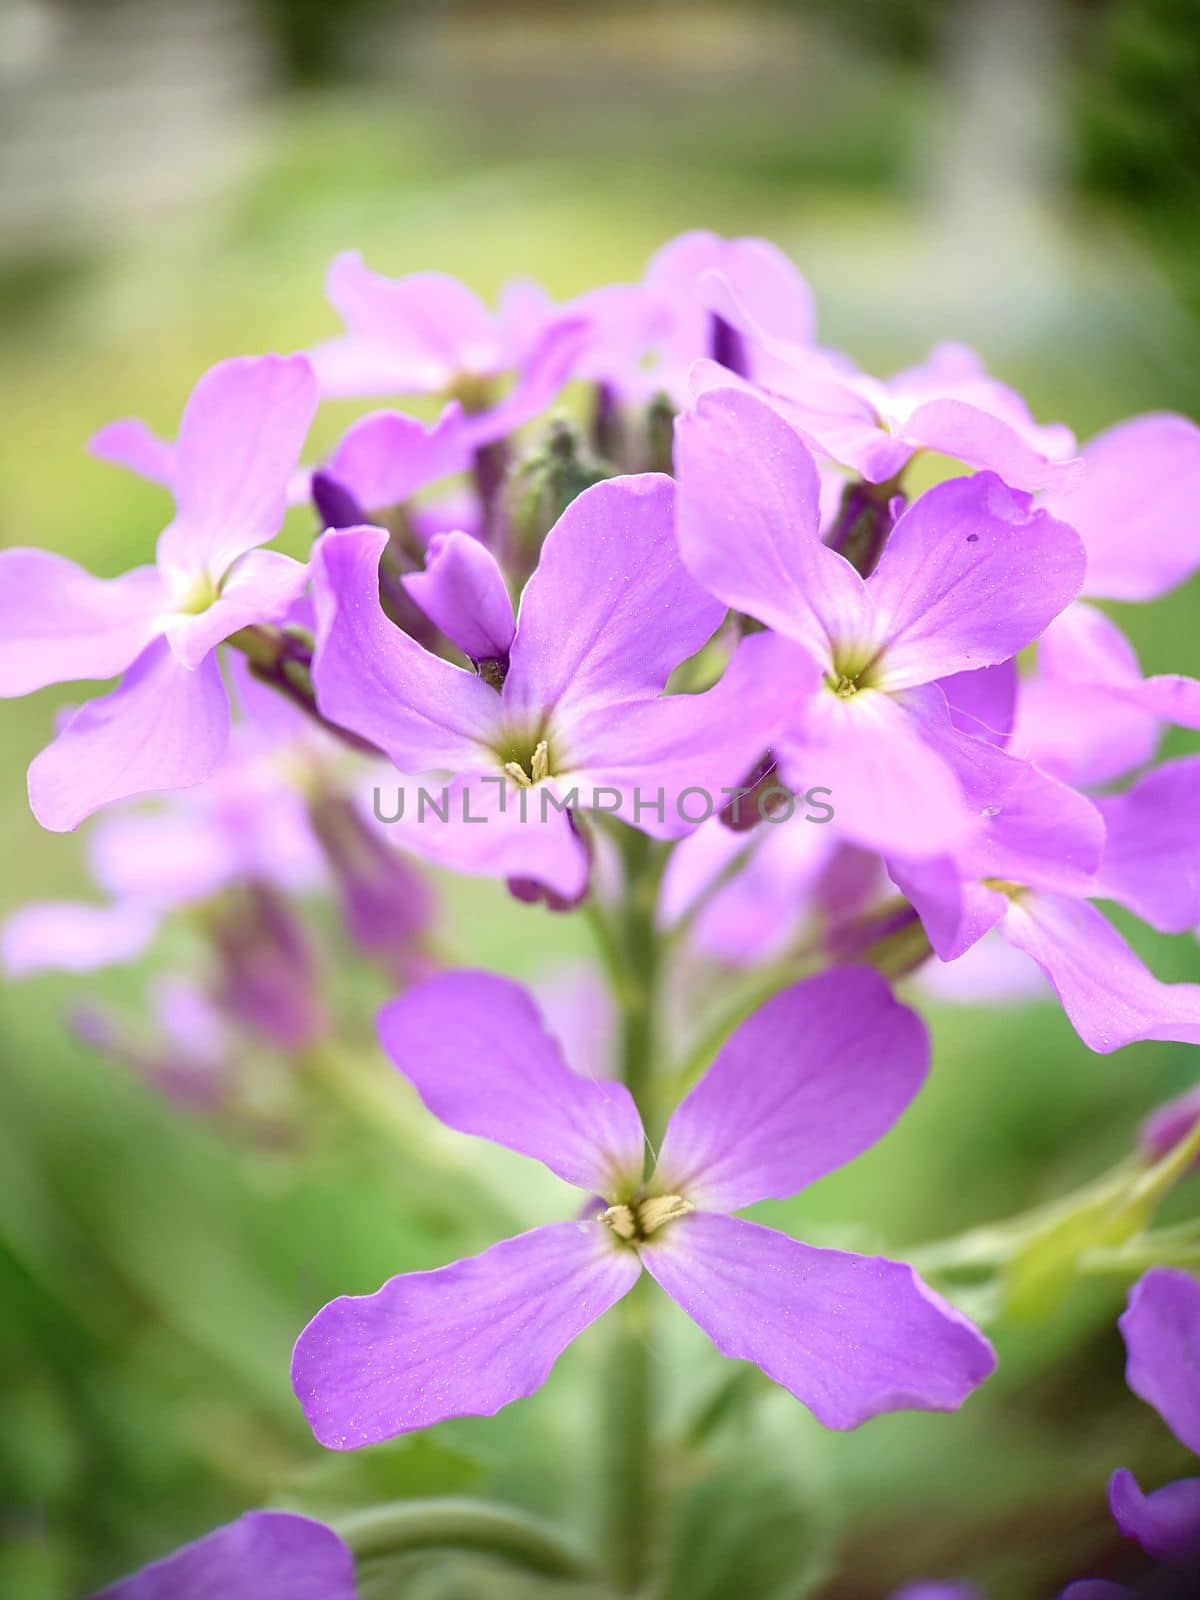 Macrophotography.Texture or background.In spring, lilac phlox blooms with a green center in the open air